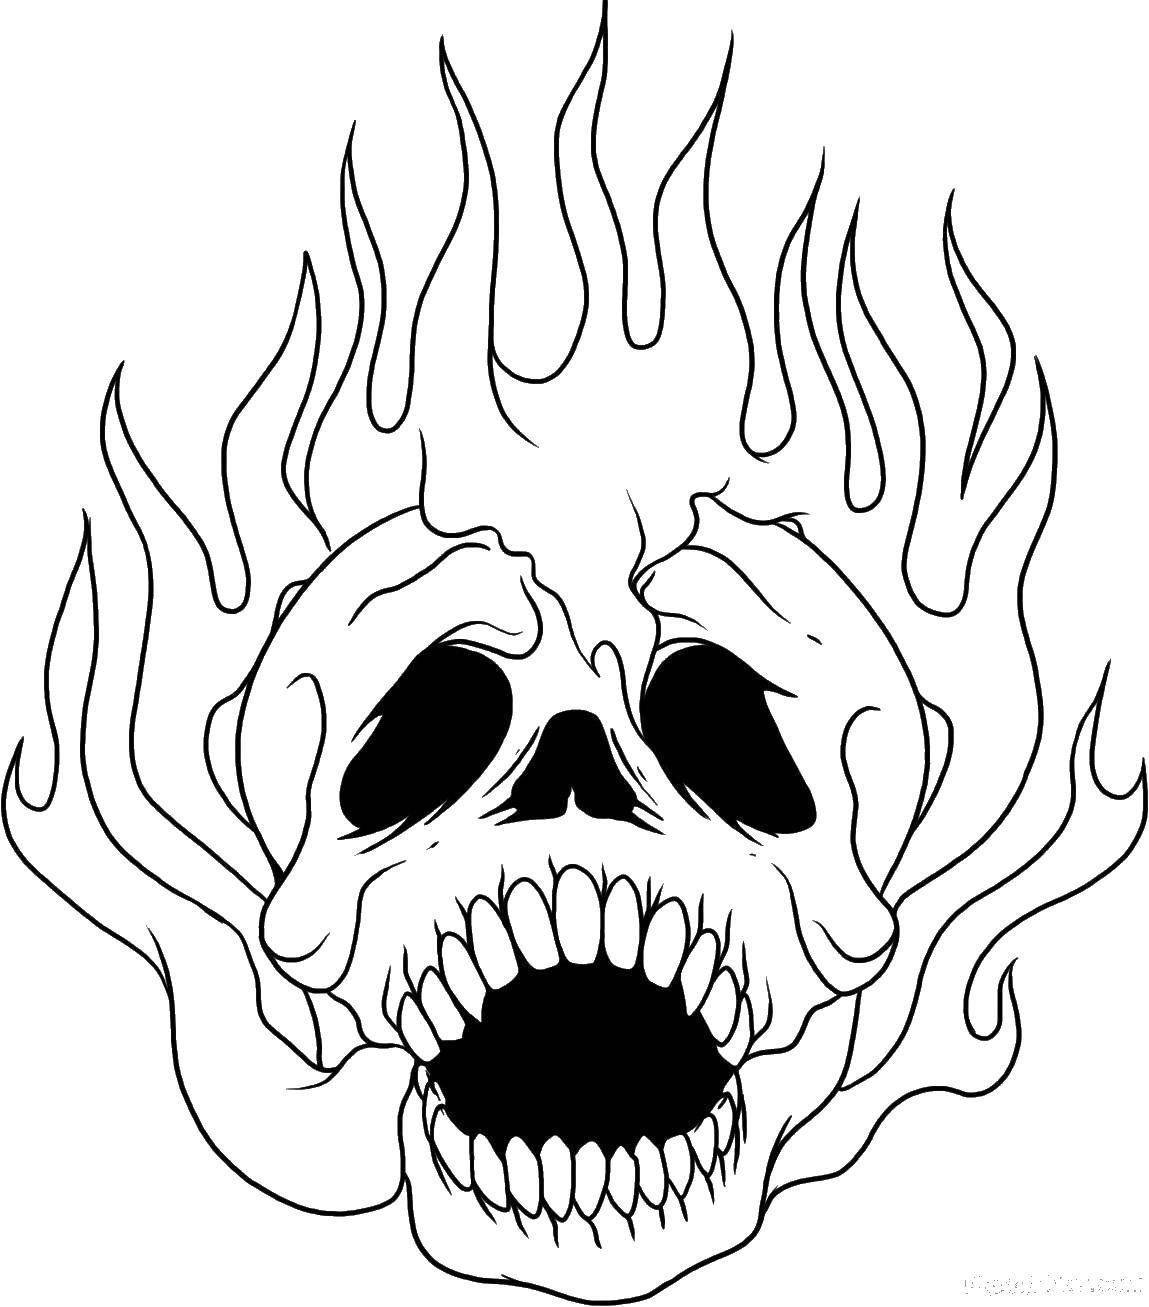 Coloring Flaming skull. Category Skull. Tags:  skull, fire, flame.